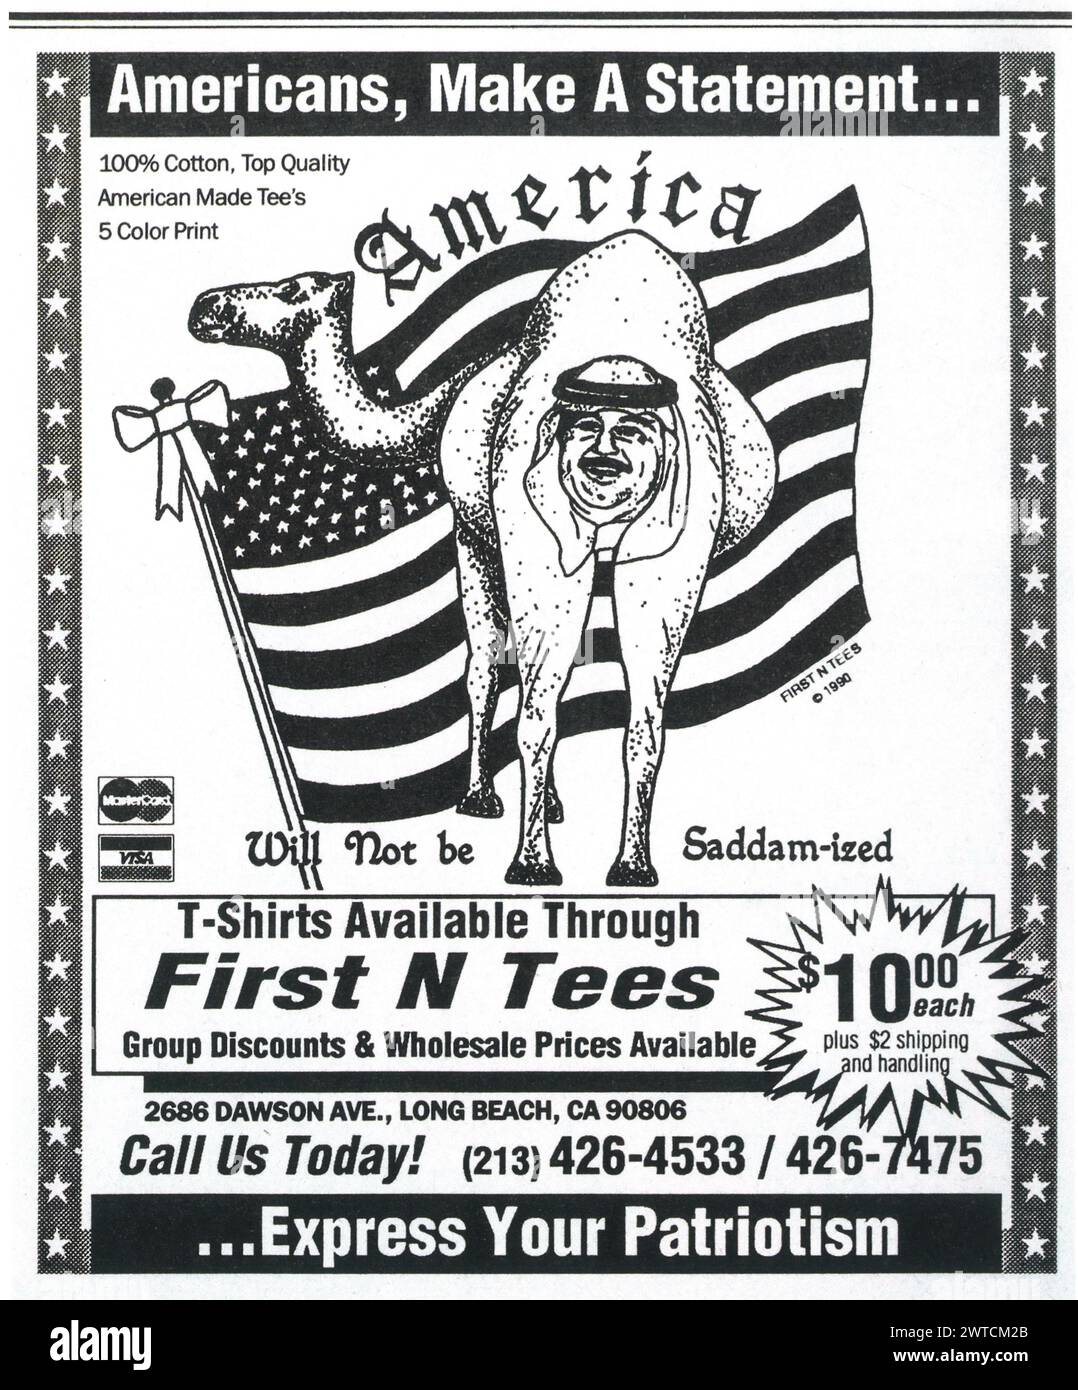 1990 First N Tees T-shirts ad. 'America...will not be saddamized' Stock Photo